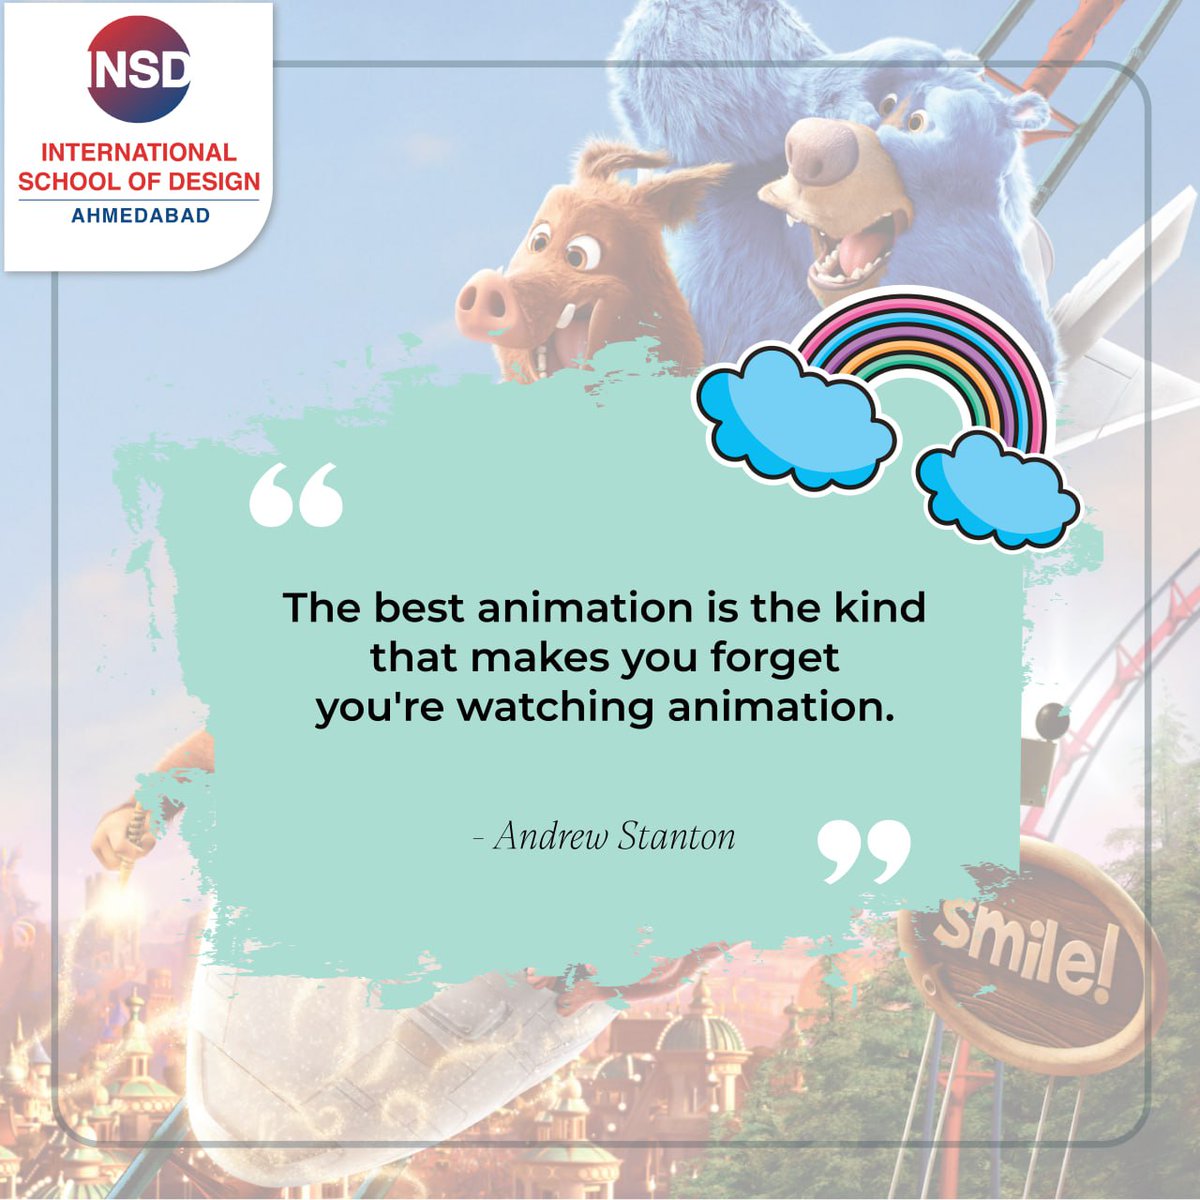 'The best animation is the kind that makes you forget you're watching animation.' - Andrew Stanton

#quotes #quote #animationquotes #animation #animationcourses #storytelling 
#animationdesign #animationschool #designschool #ahmedabad #insdahmedabad #designschoolinahmedabad